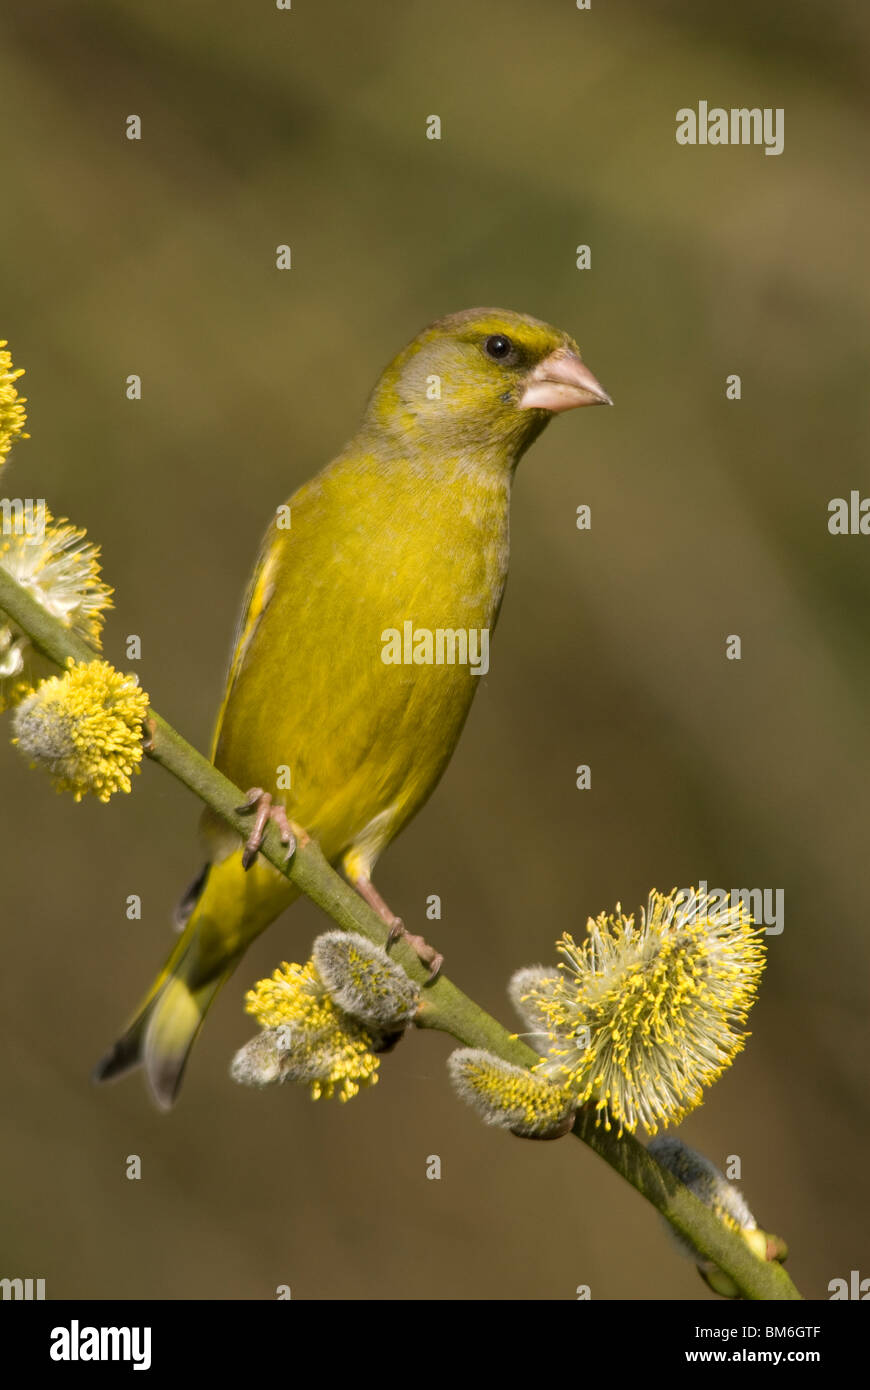 Greenfinch, (Carduelis chloris) adult male perched on flowering willow branch Stock Photo